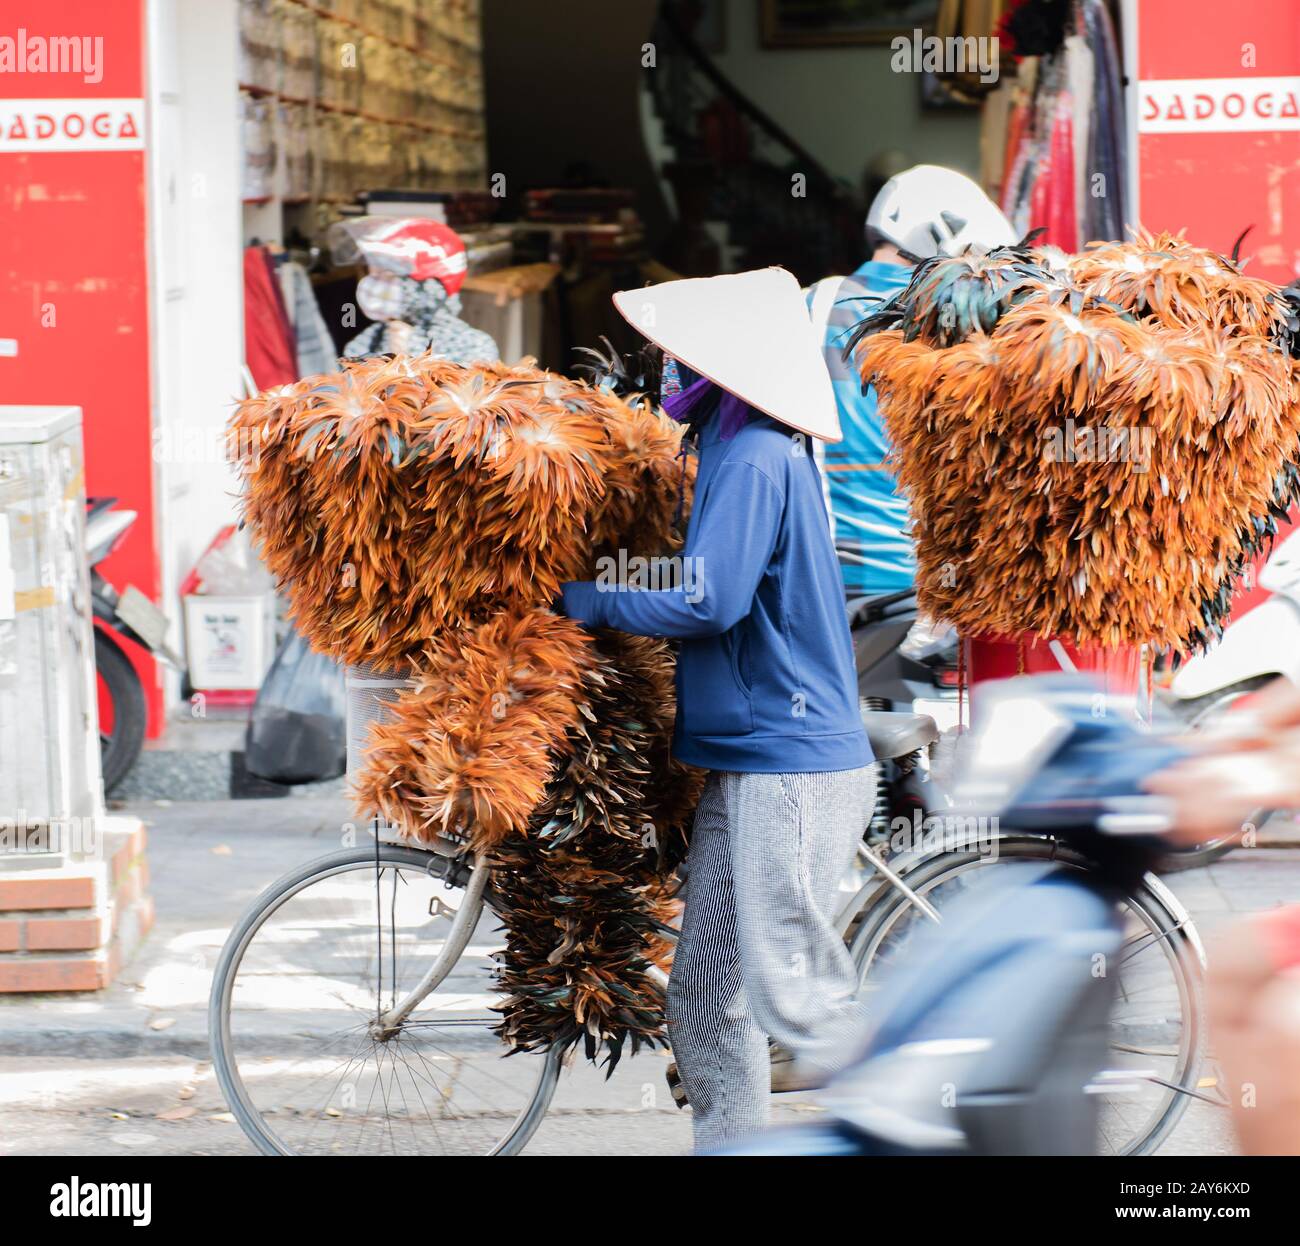 Vietnamese street vendors act and sell their vegetables and fruit products in Hanoi, Vietnam Stock Photo